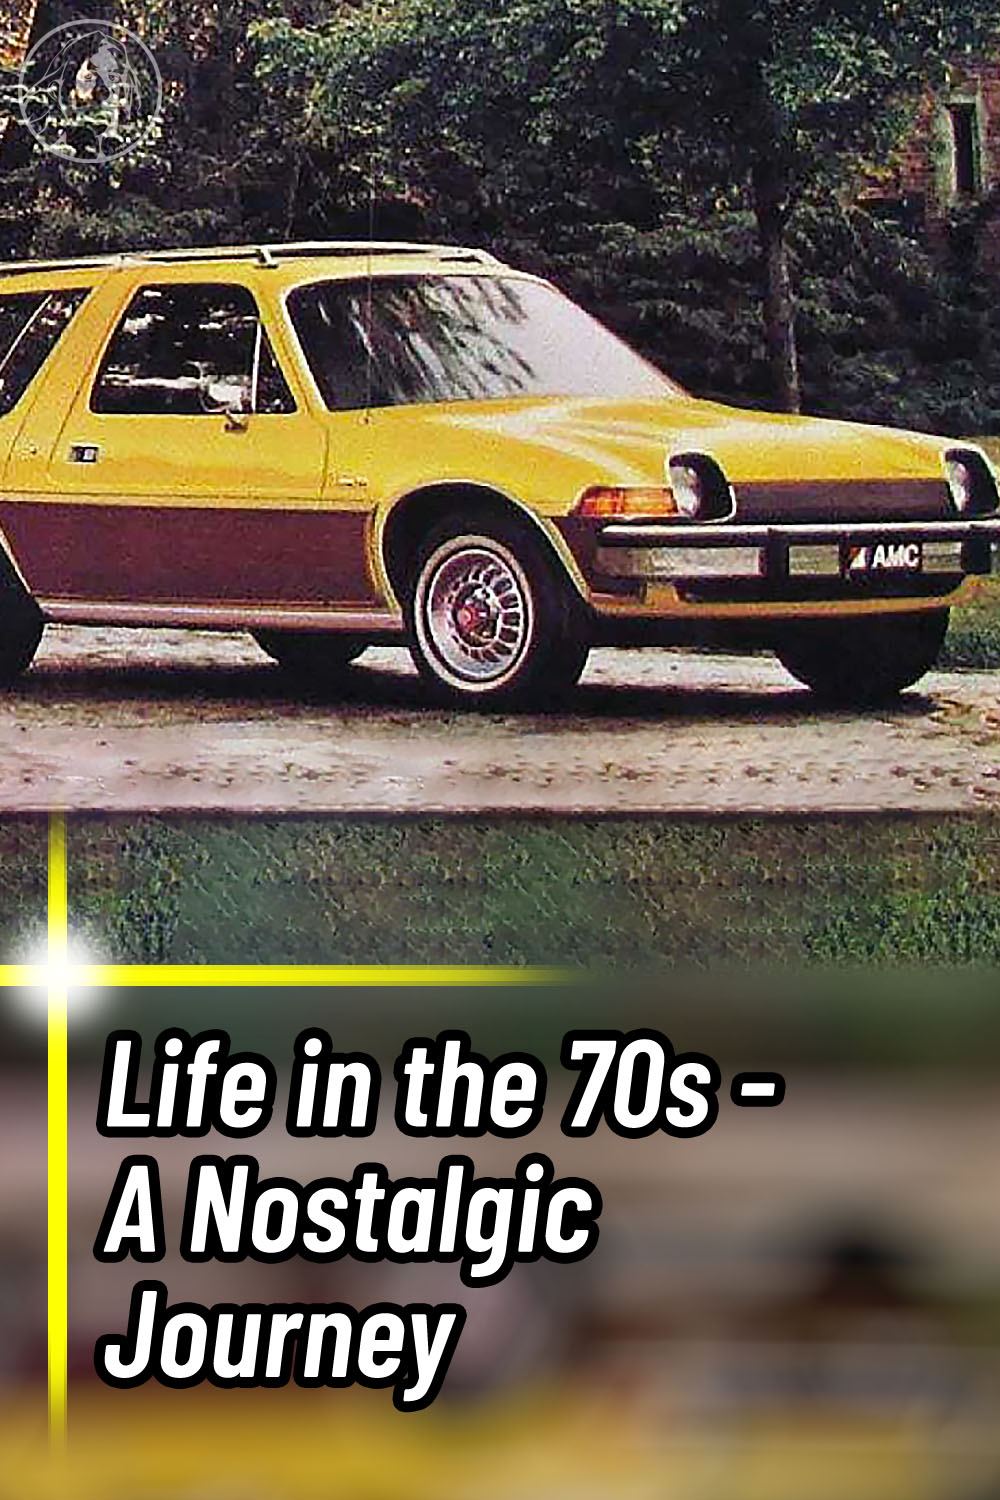 Life in the 70s - A Nostalgic Journey